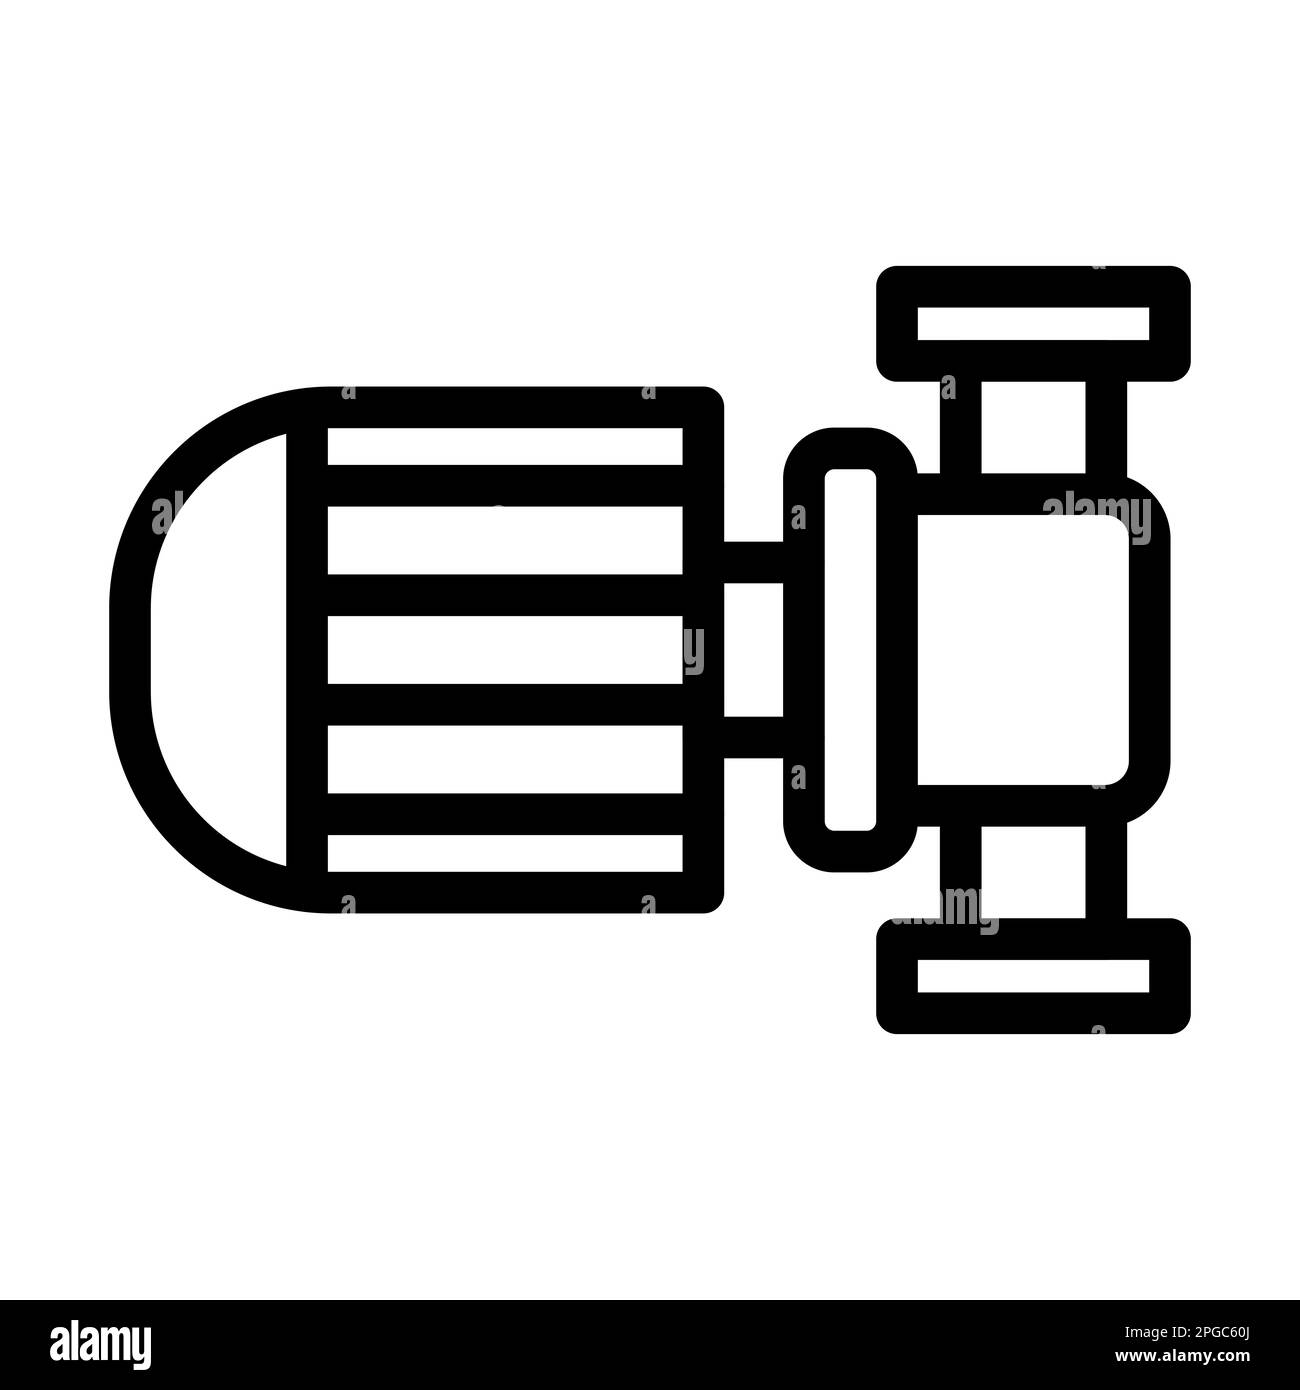 Pump Vector Thick Line Icon For Personal And Commercial Use. Stock Photo